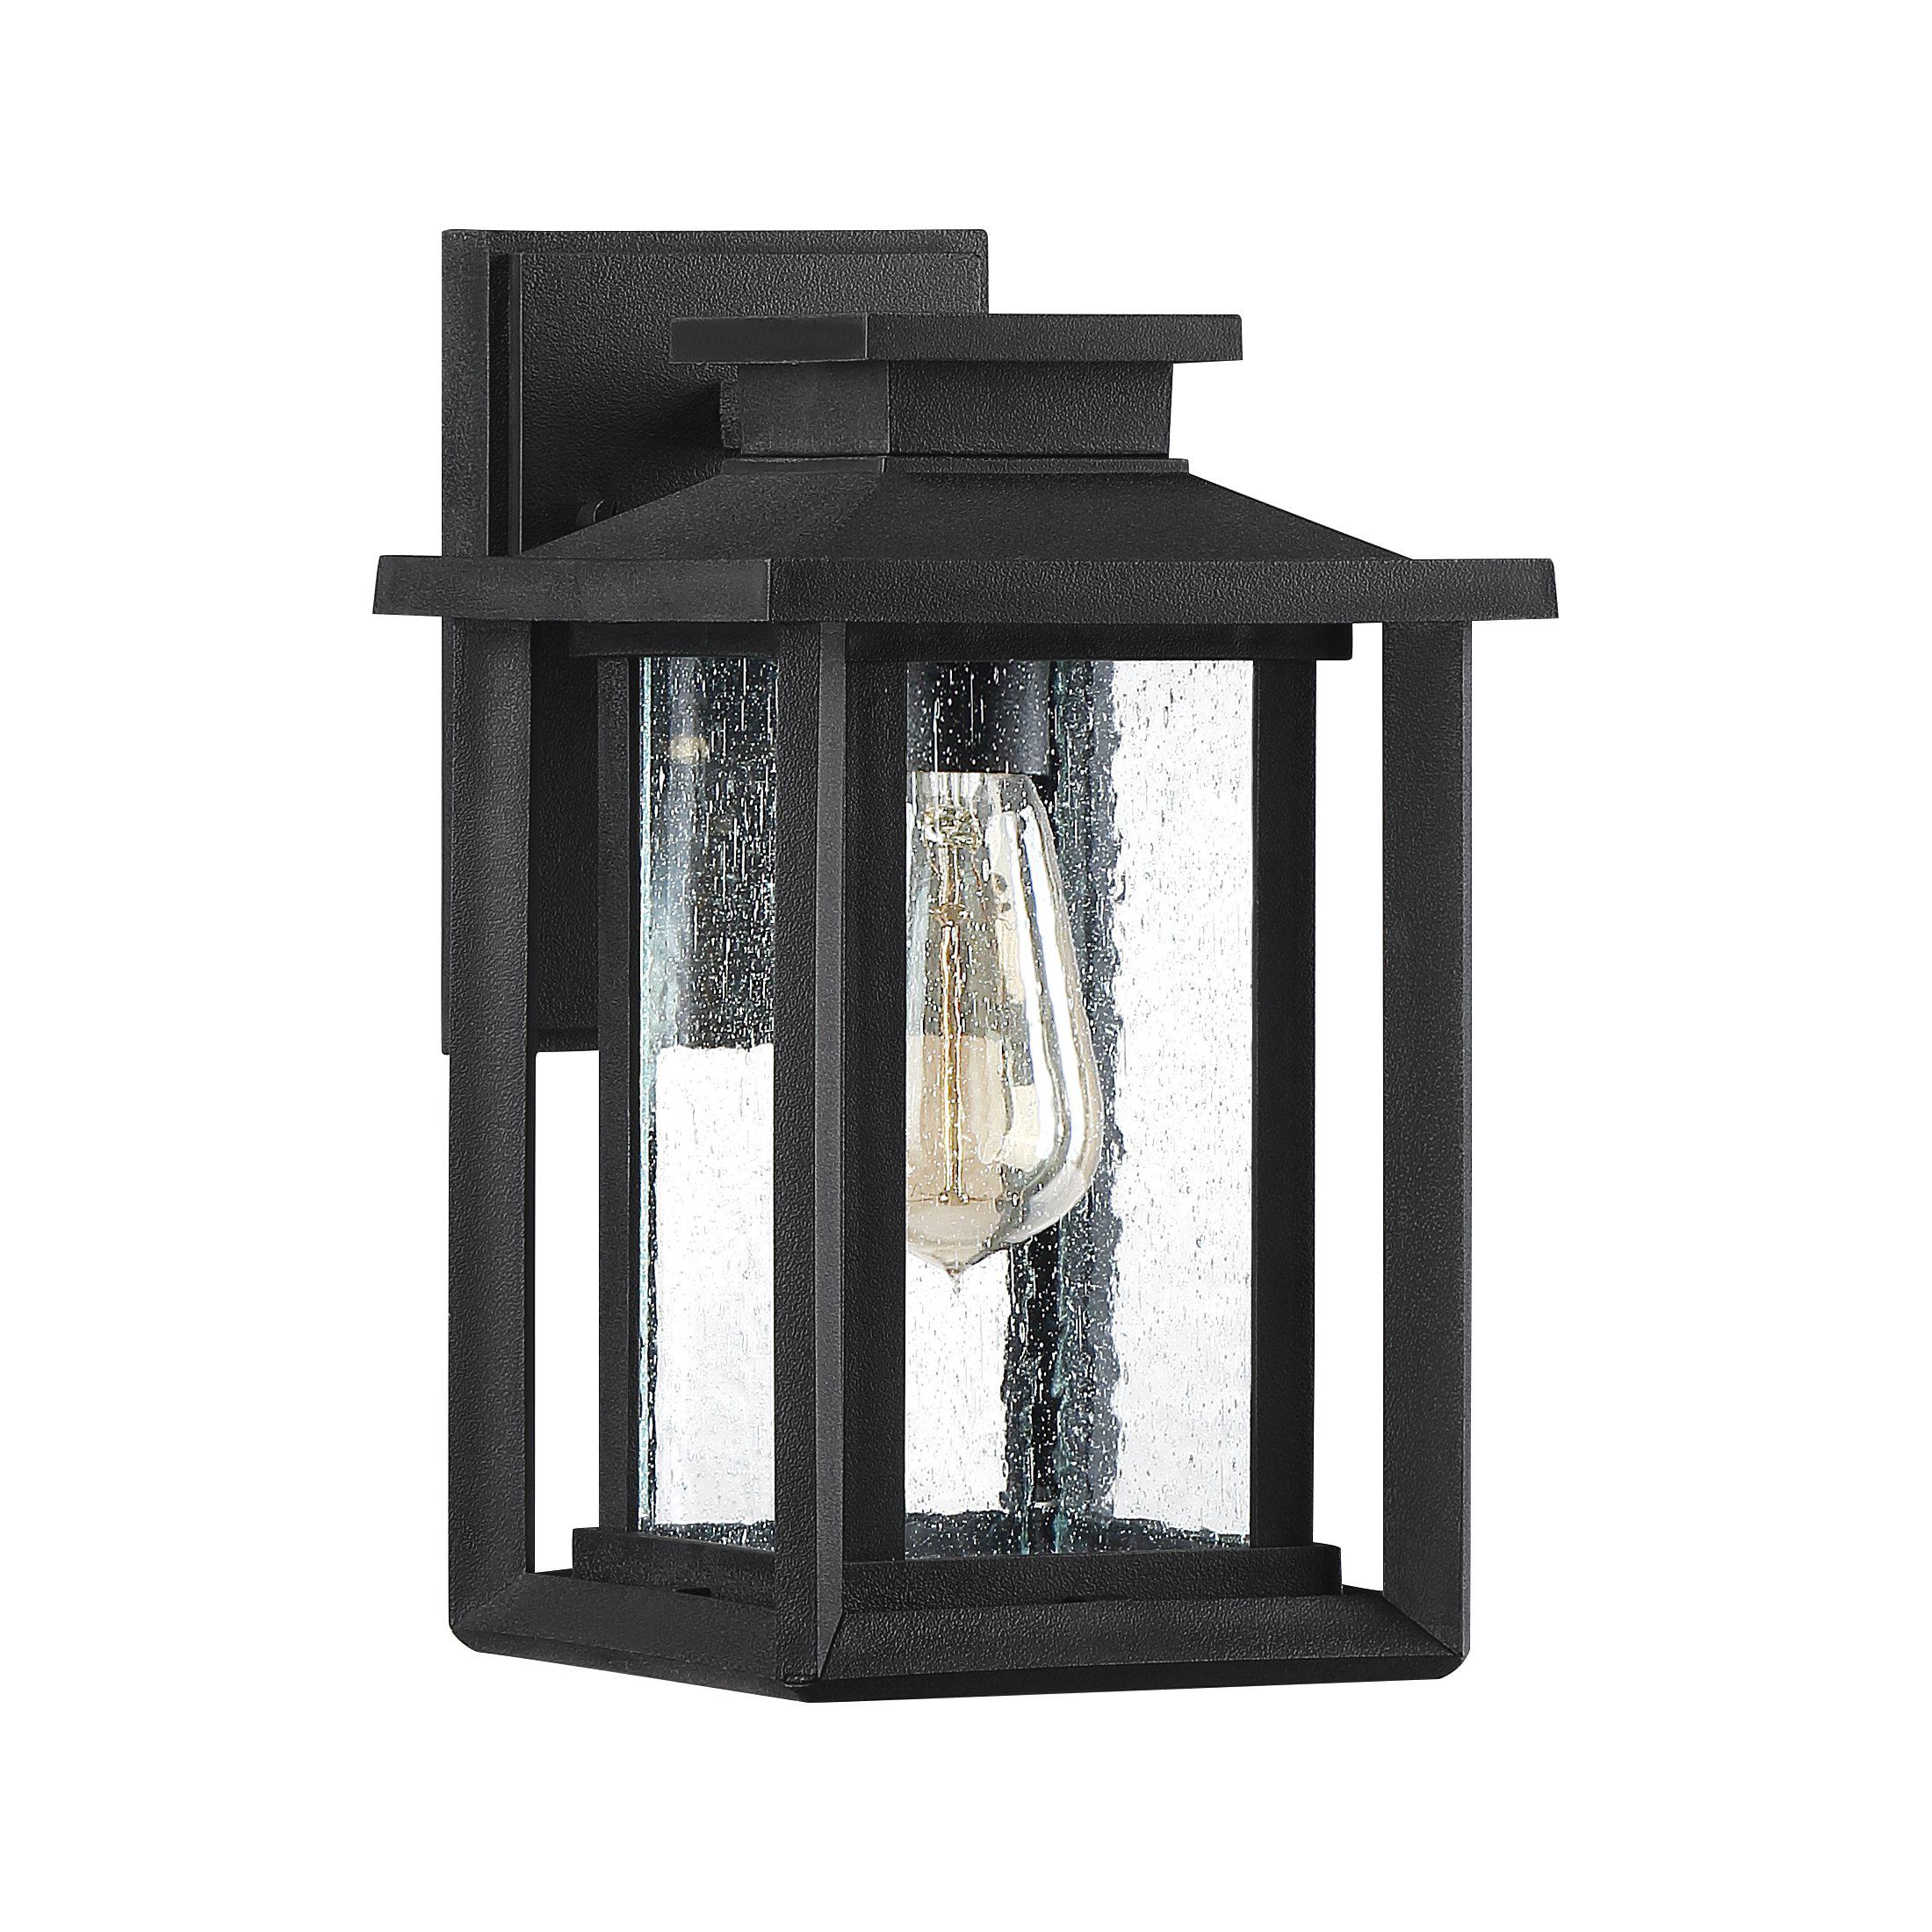 Quoizel Wakefield Outdoor Lantern, Small | Overstock Outdoor l Wall Quoizel Inc   